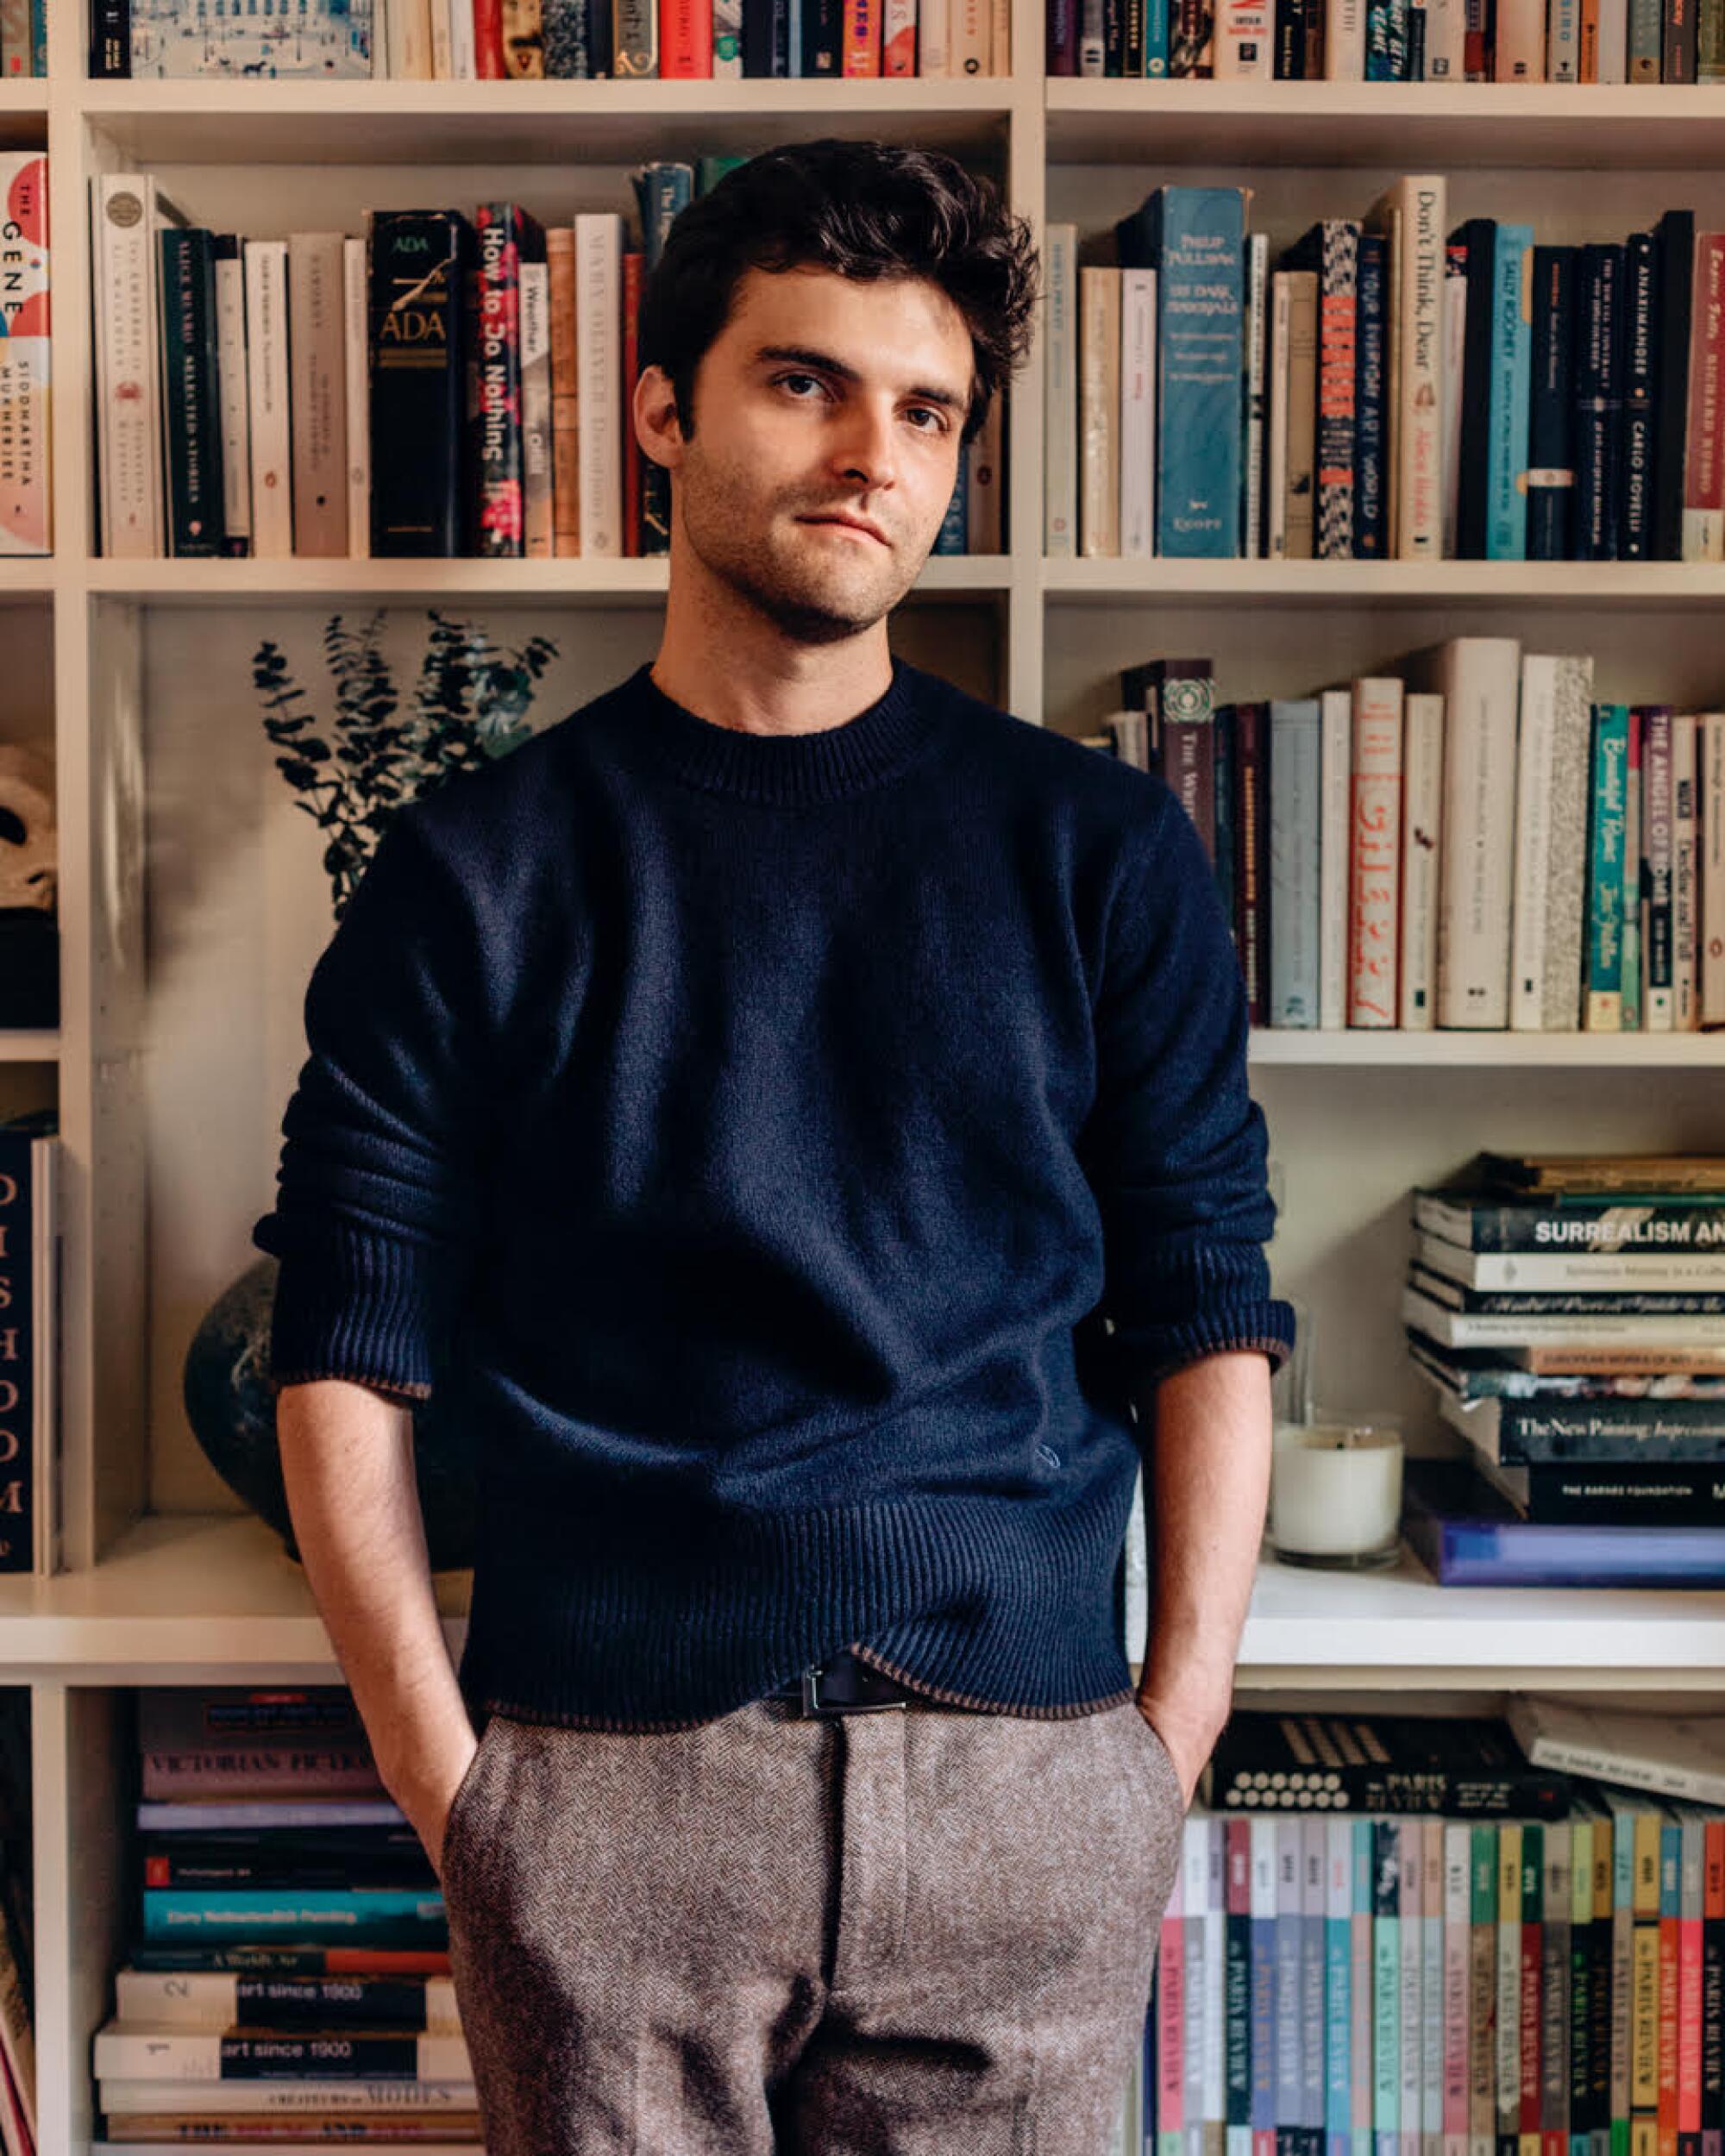 Portrait of Cody Delistraty standing in front of a bookshelf